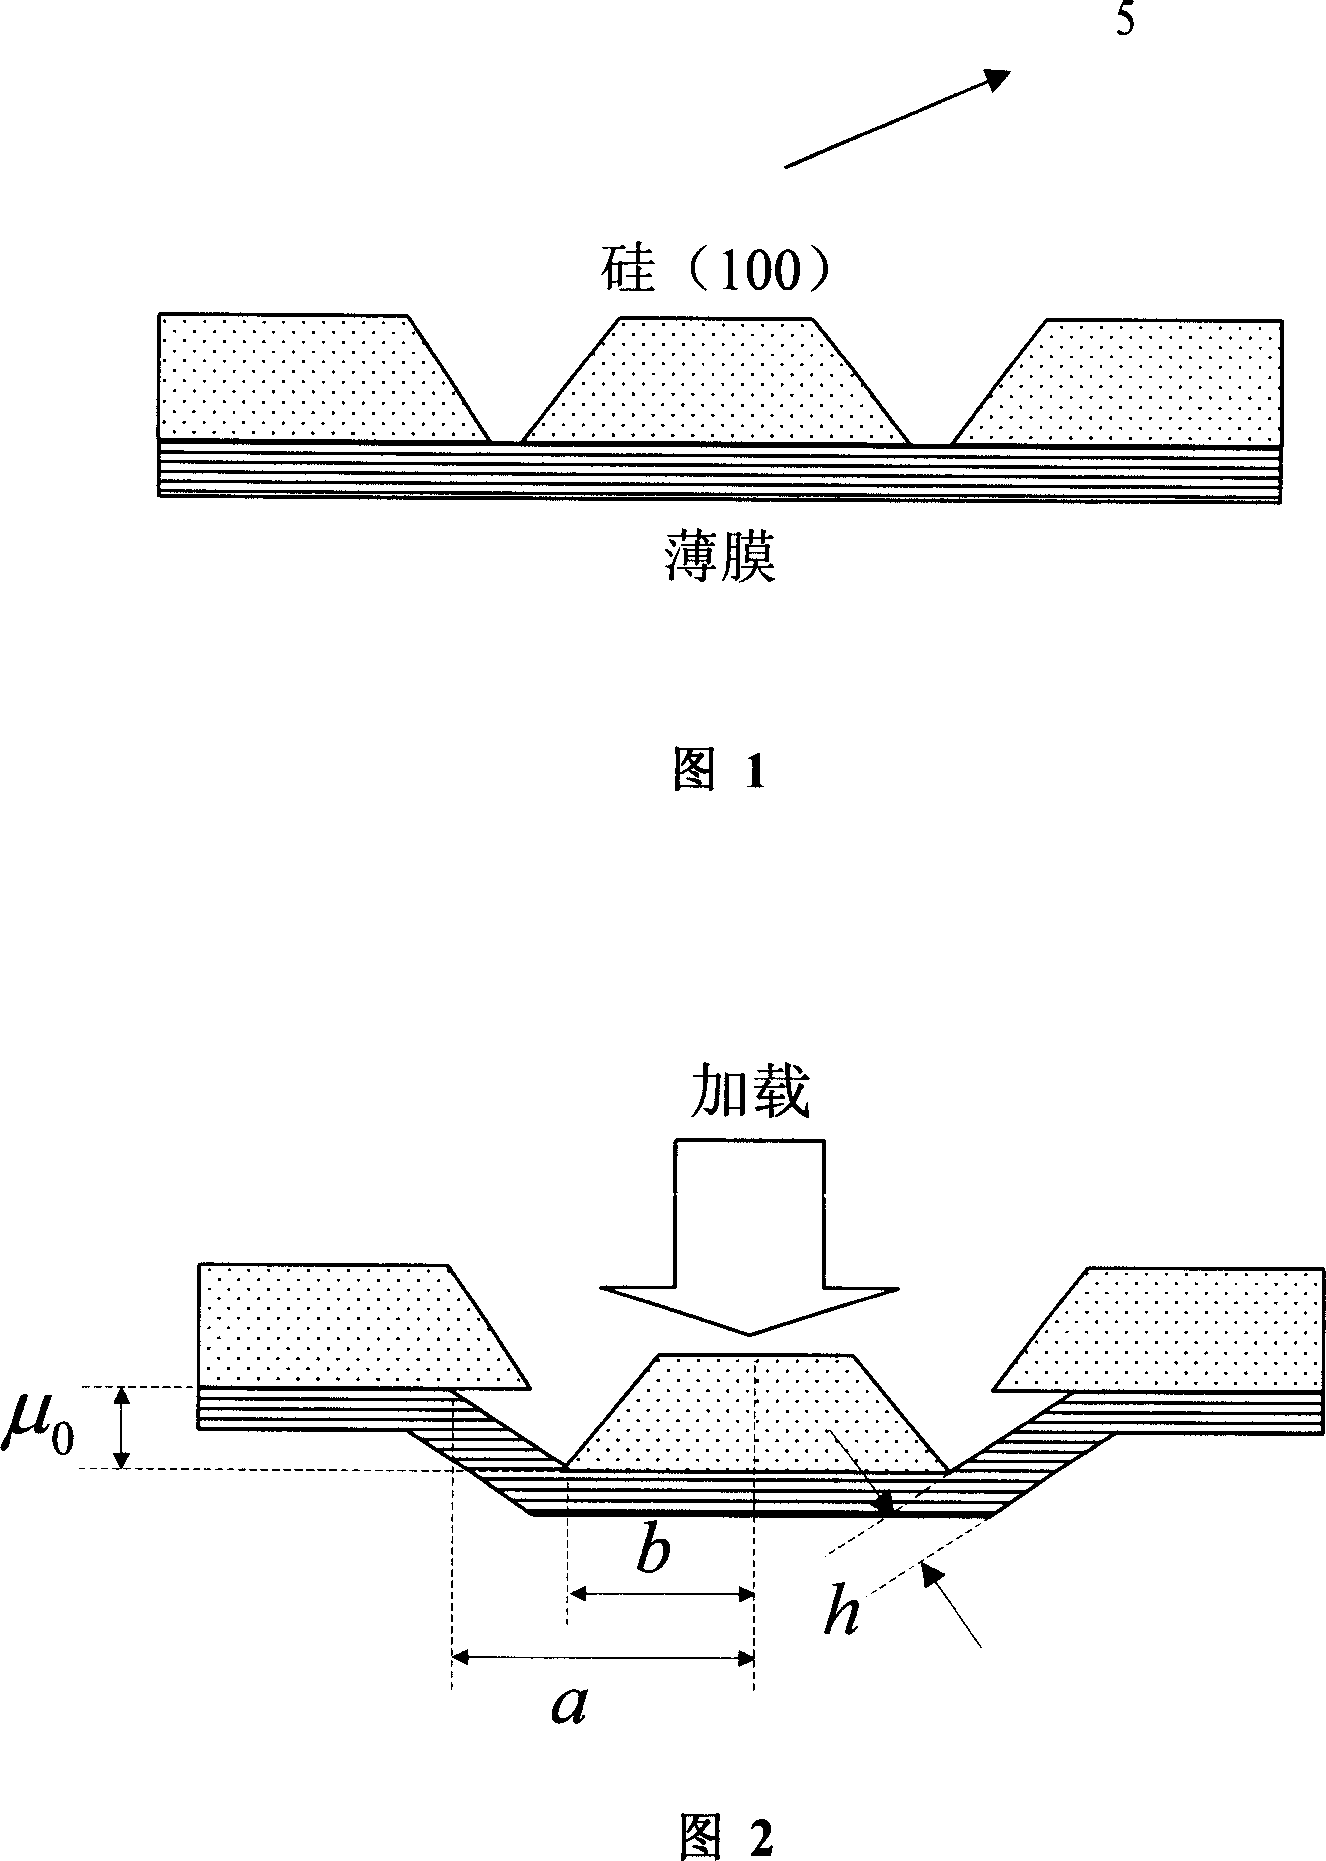 Method for measuring silicon base body and membrane base combination intensity